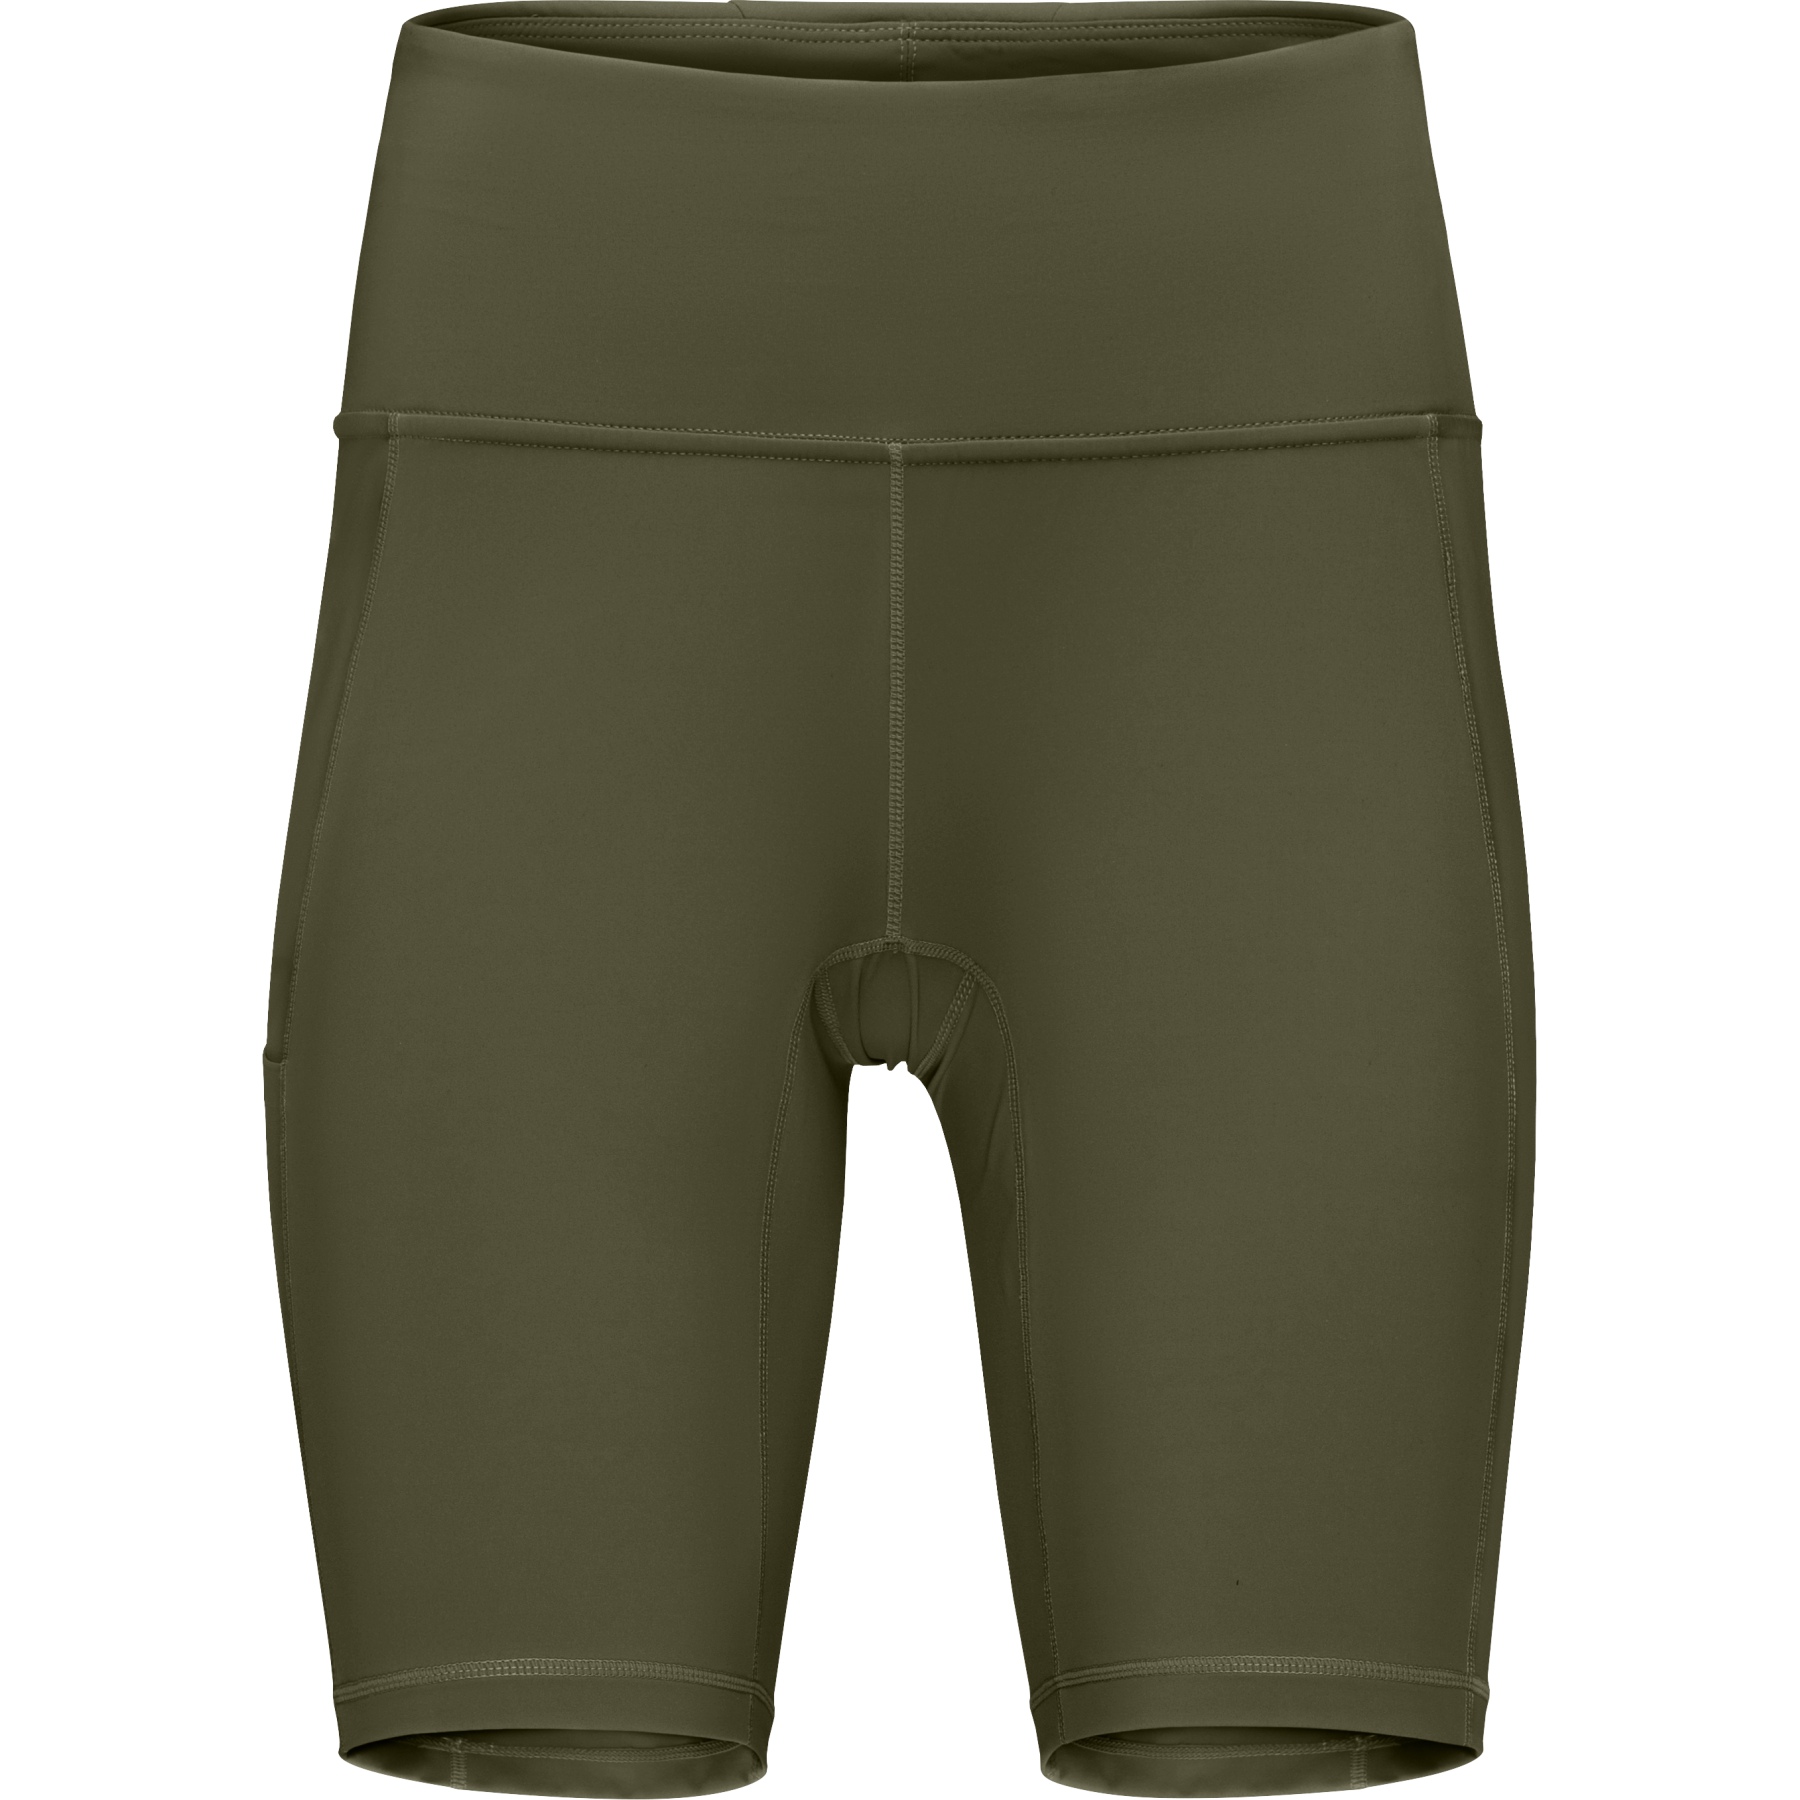 Picture of Norrona short Tights Women - Olive Night